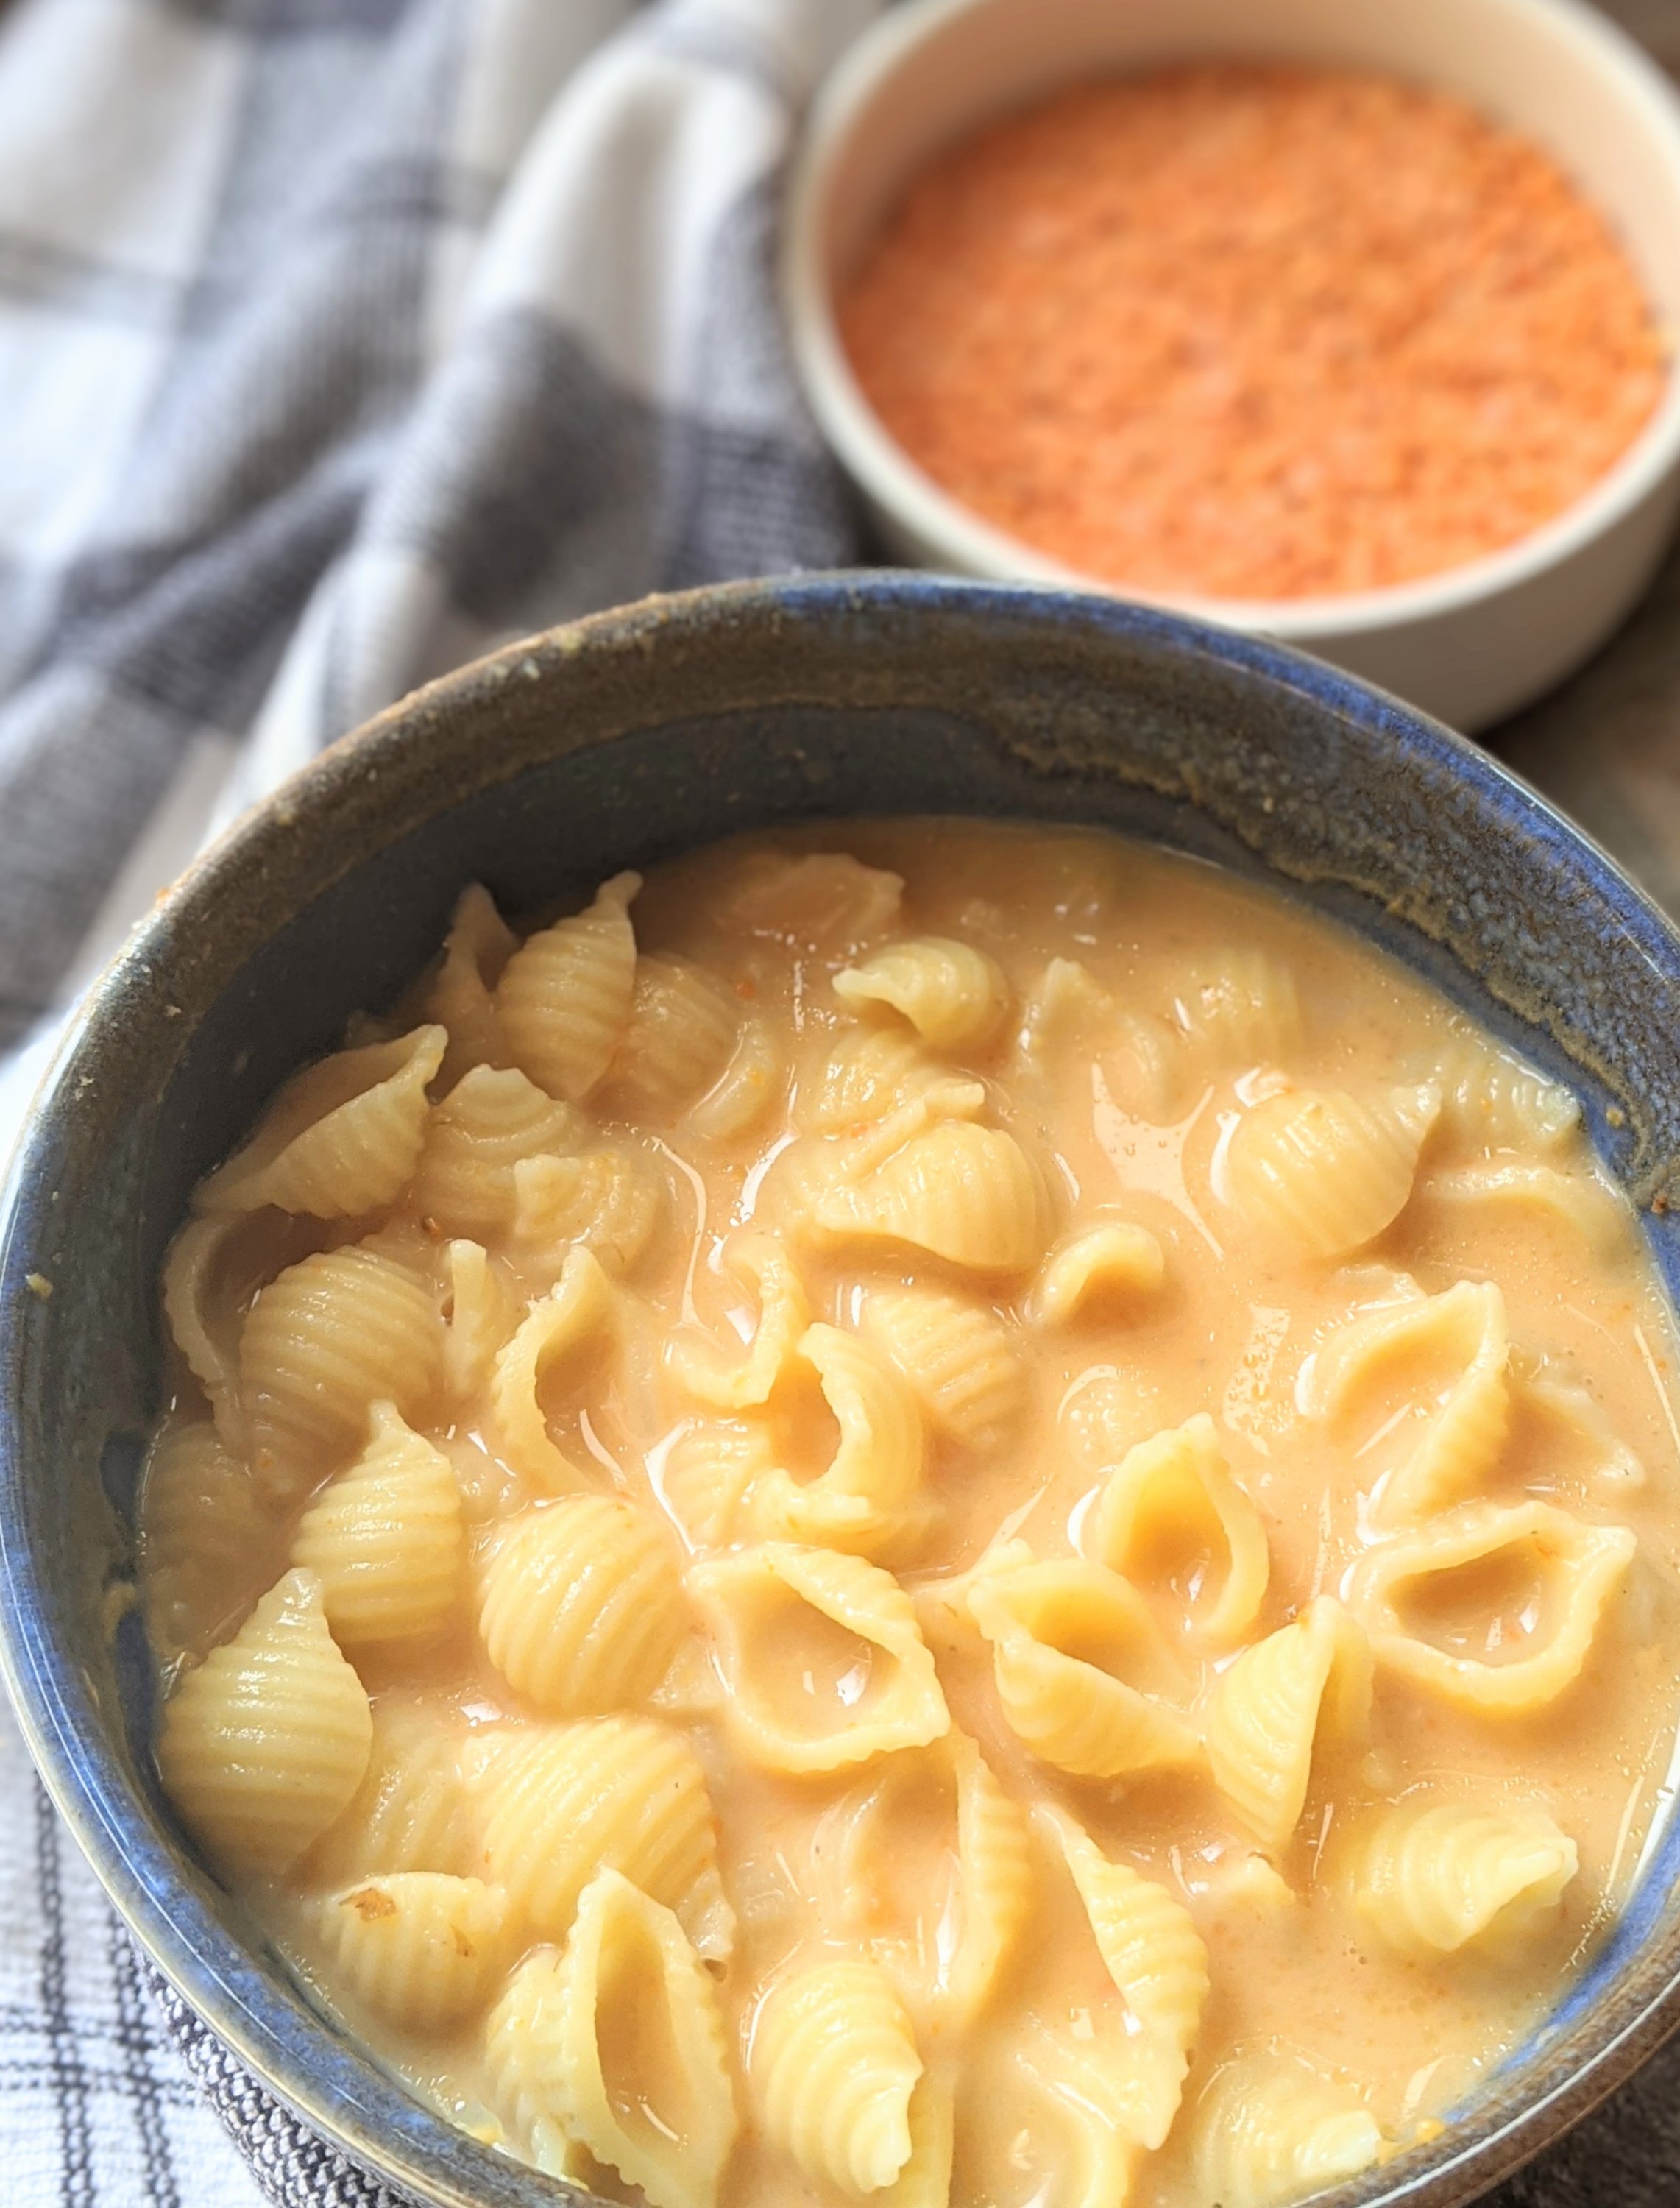 high protein mac and cheese soup macaroni and cheese made with small shells or any pasta healthy soup recipes for vegetarians can be vegan, meatless monday meal prep